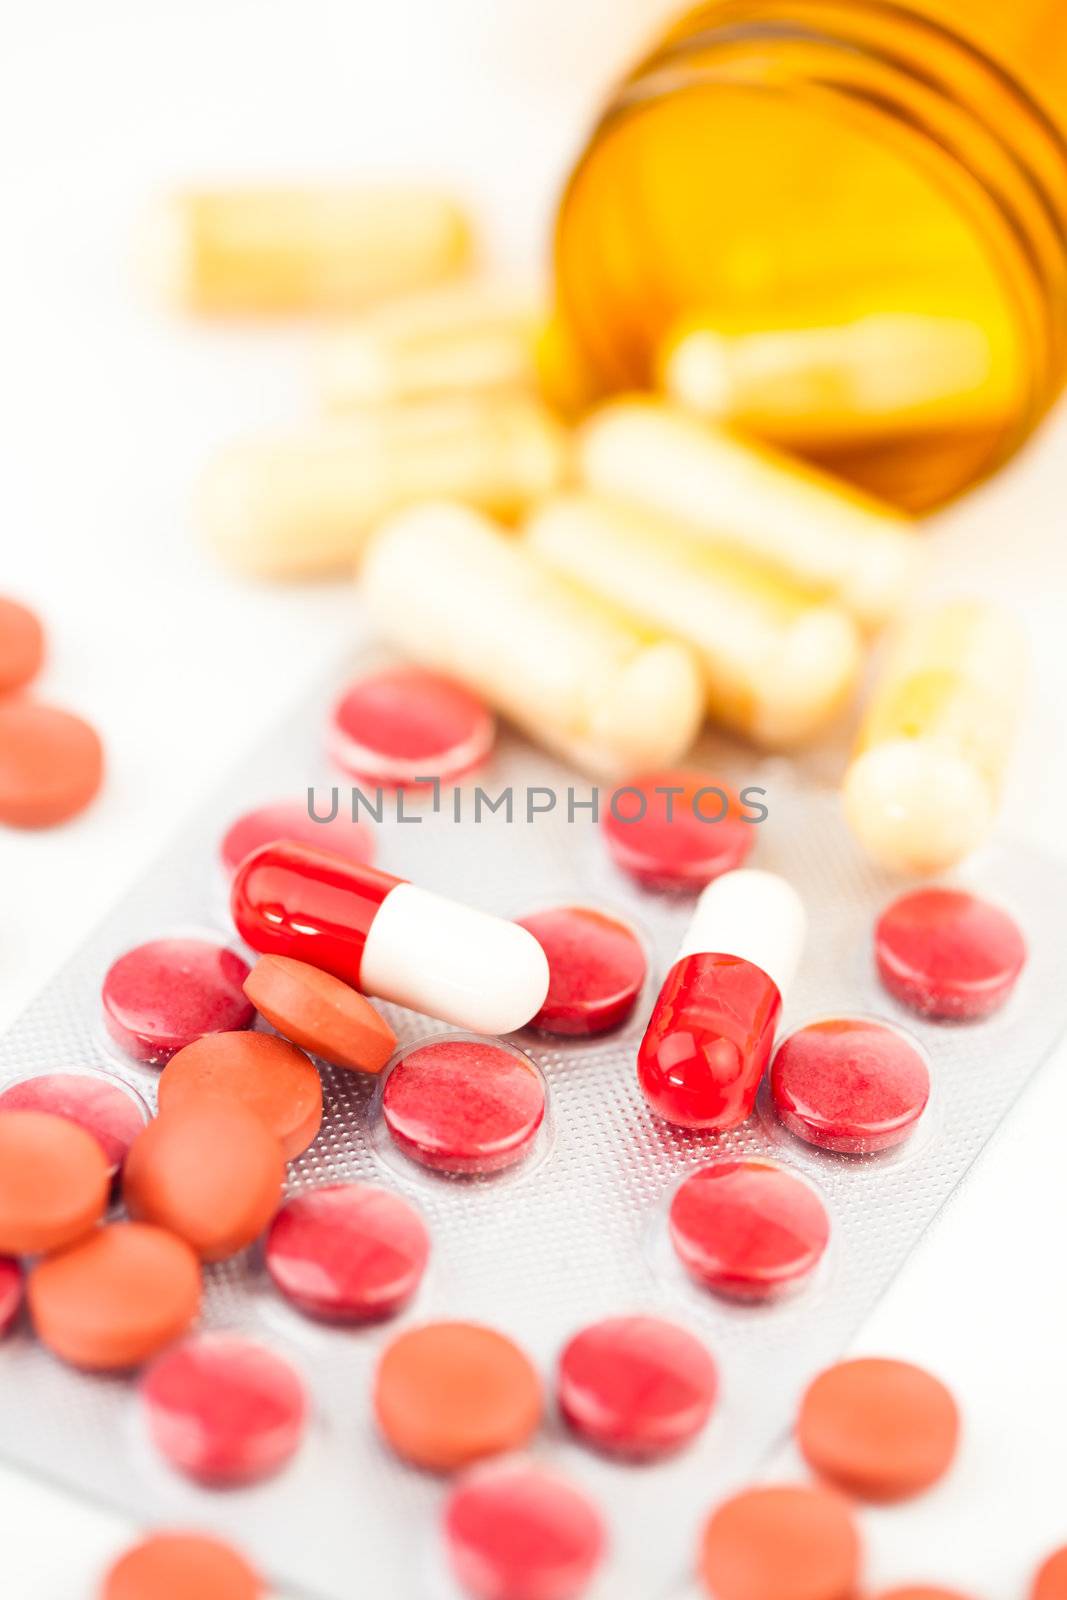 Medications dispersed against white background